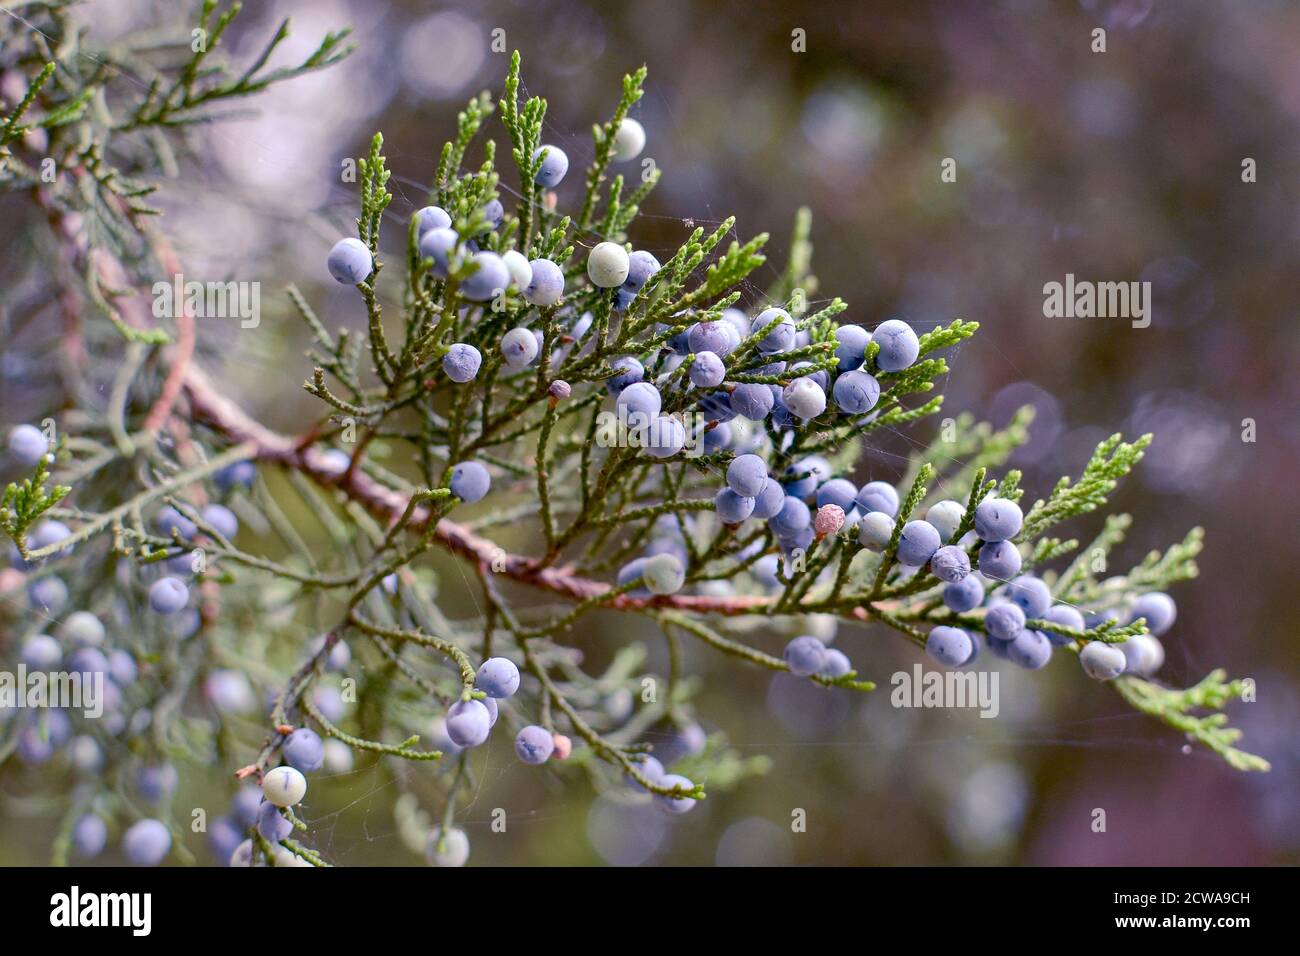 autumn and spring plants background. Christmas tree or pine with blue berries. Blue plants background. Stock Photo